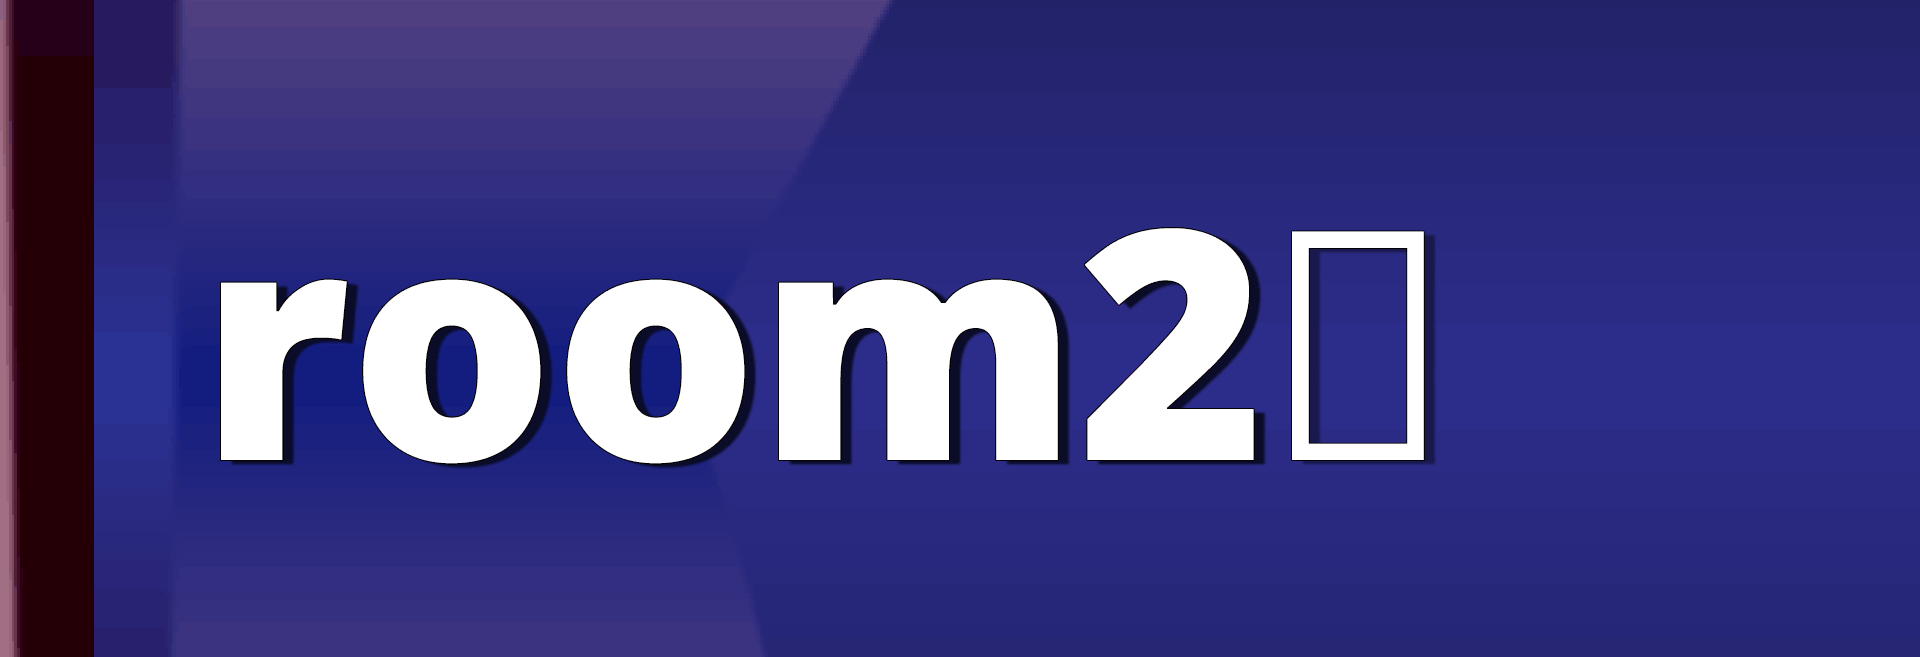 A gradient blue background behind bold white text that reads room2 with a square cursor at the end.